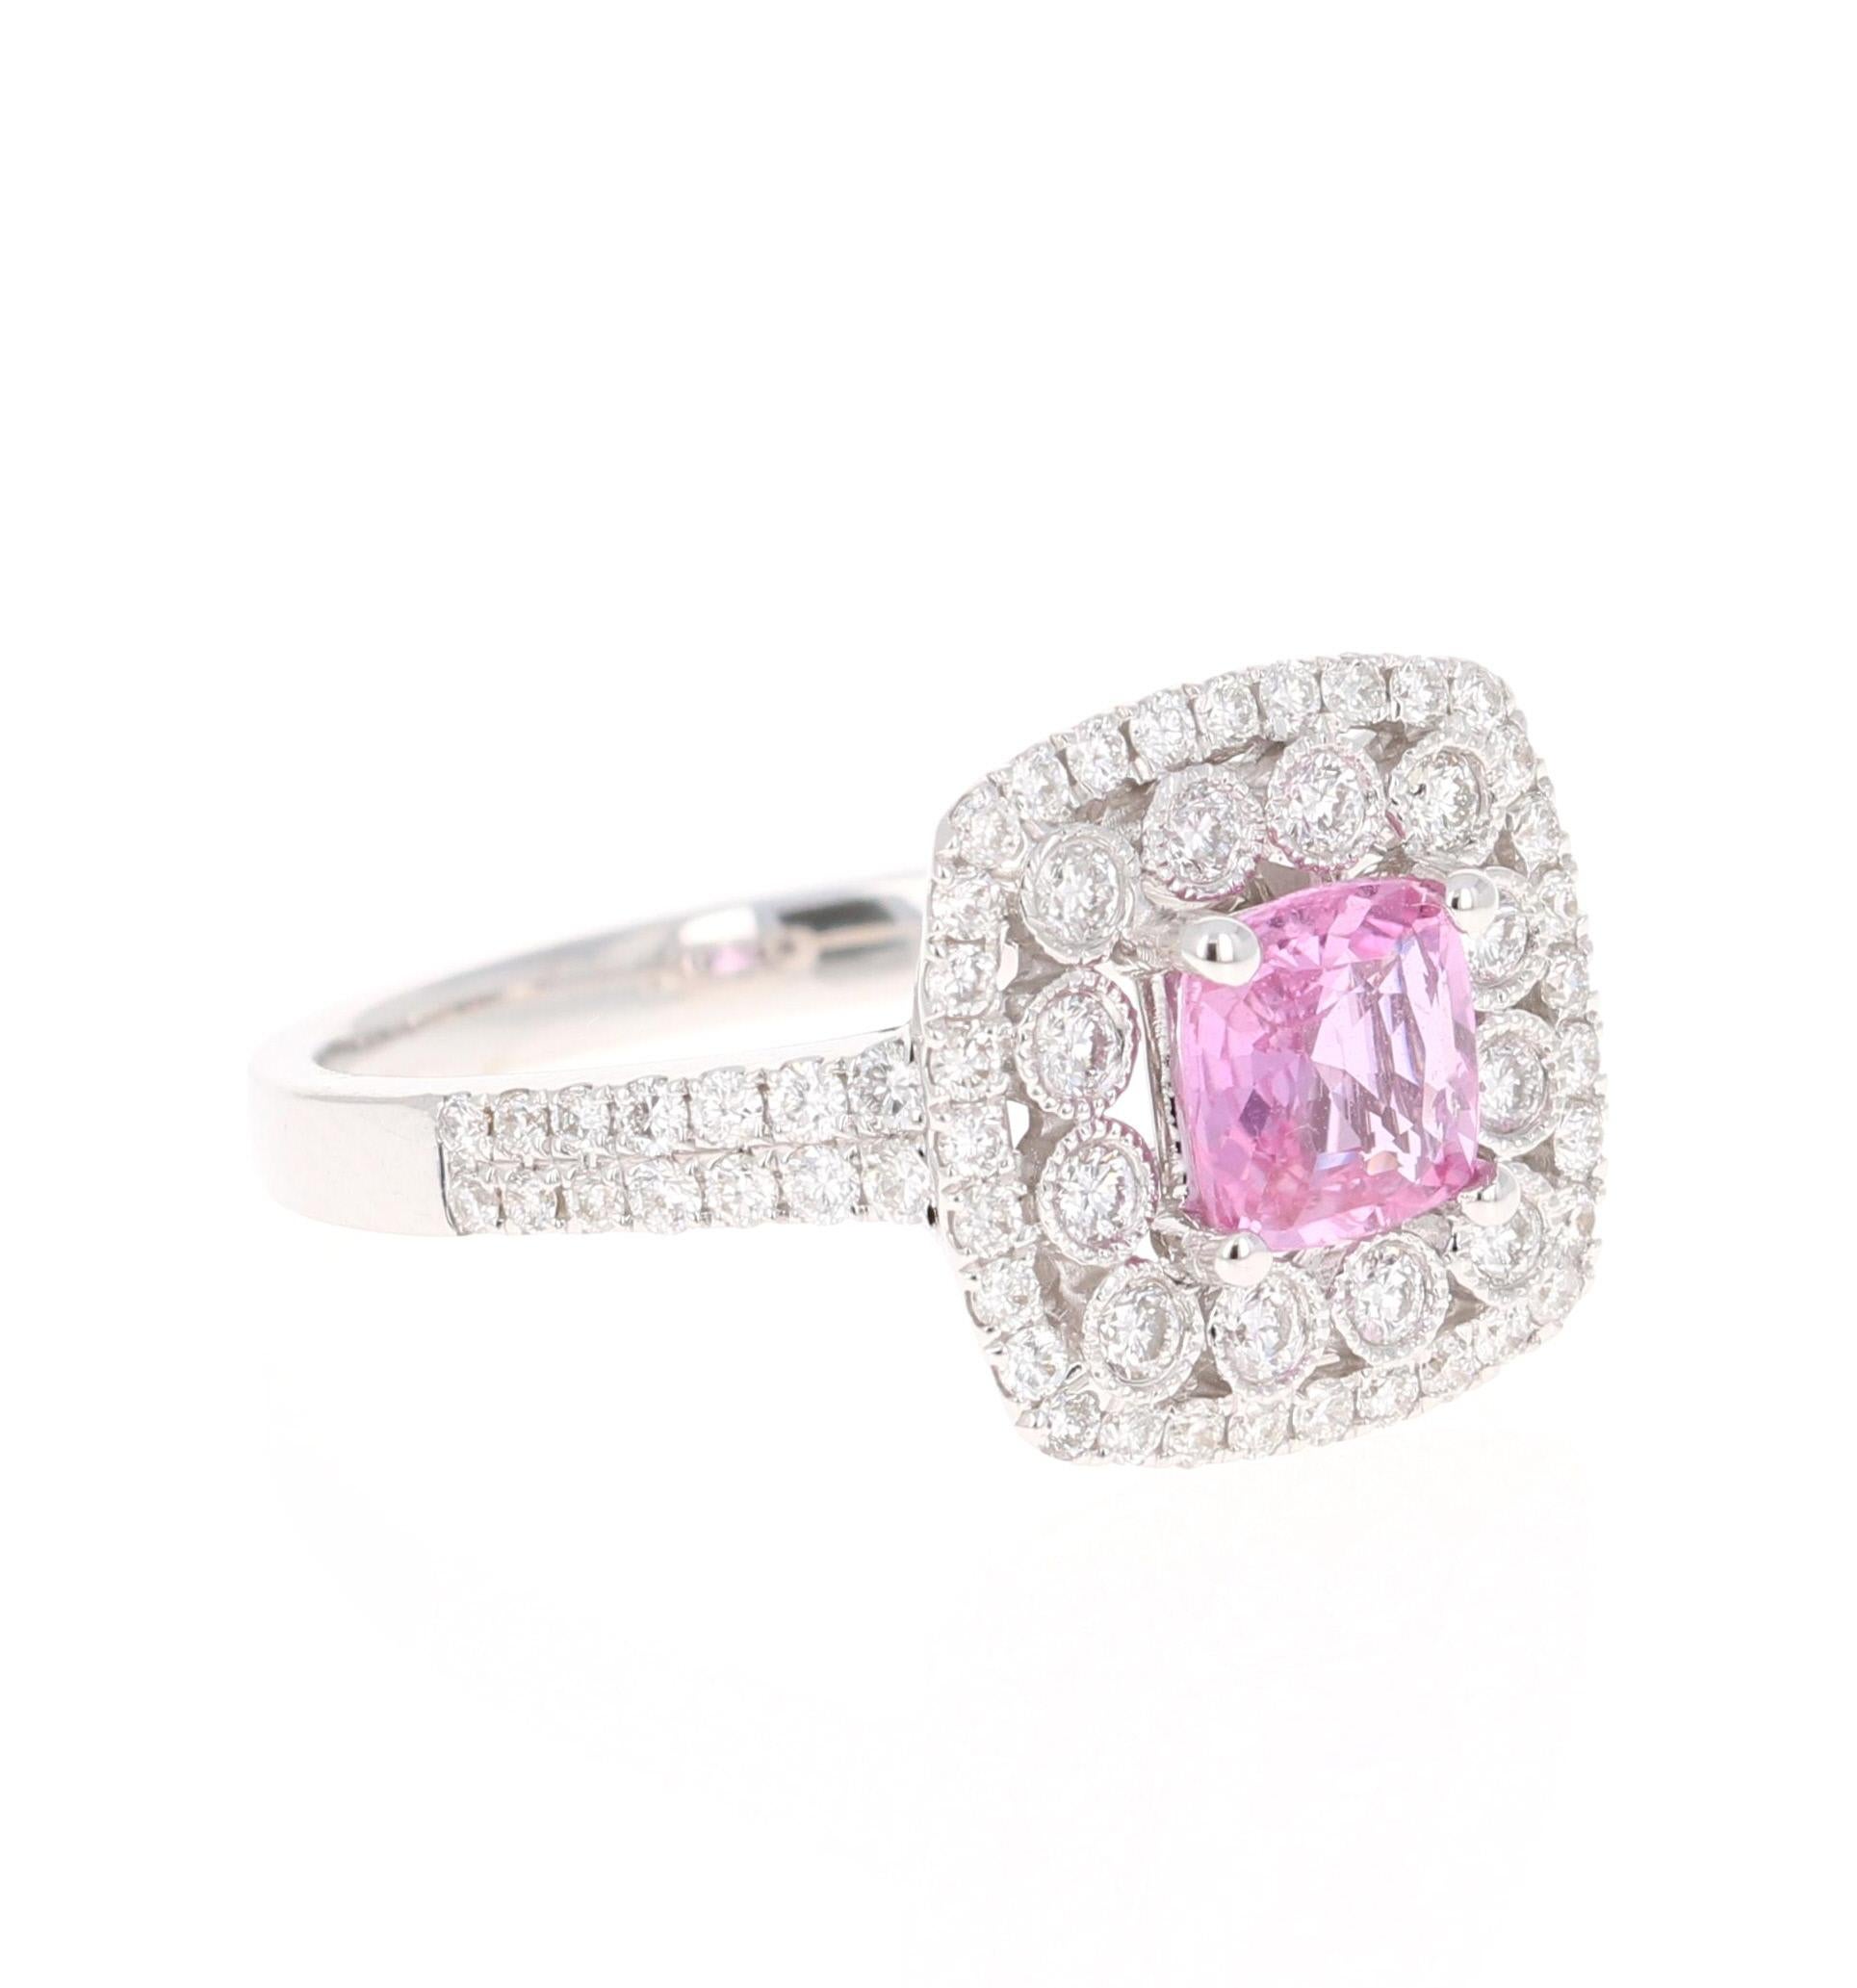 Cute Pink Sapphire and Diamond Ring! Can be an everyday ring or a unique Engagement Ring!

This beautiful ring has a Square-Cushion Cut Pink Sapphire that weighs 1.00 Carat. 

The ring is embellished with 72 Round Cut Diamonds that weigh 0.63 Carats